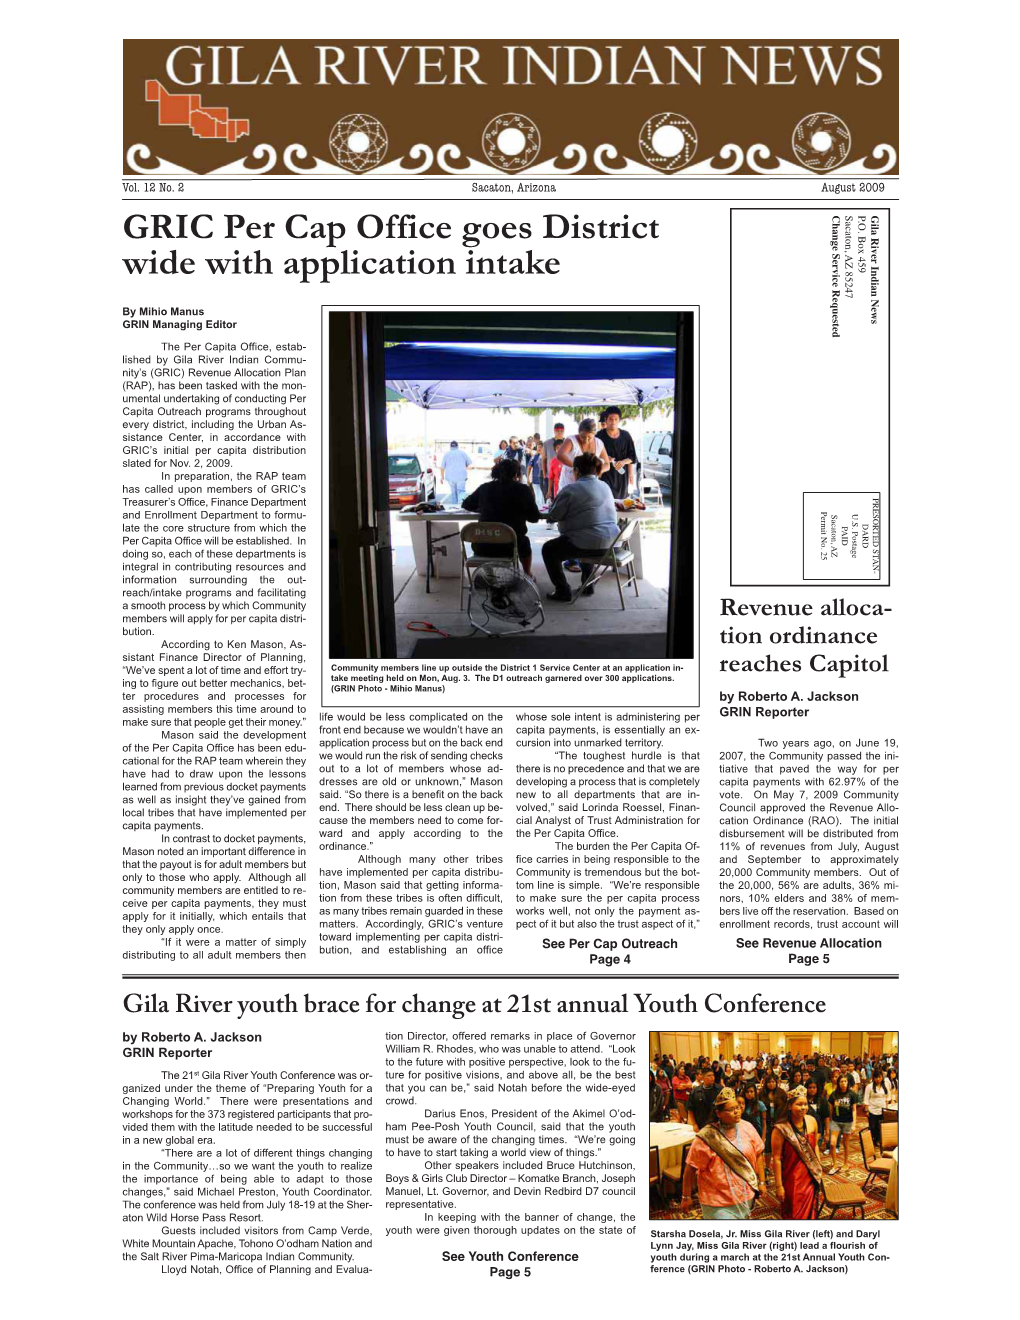 GRIC Per Cap Office Goes District Wide with Application Intake